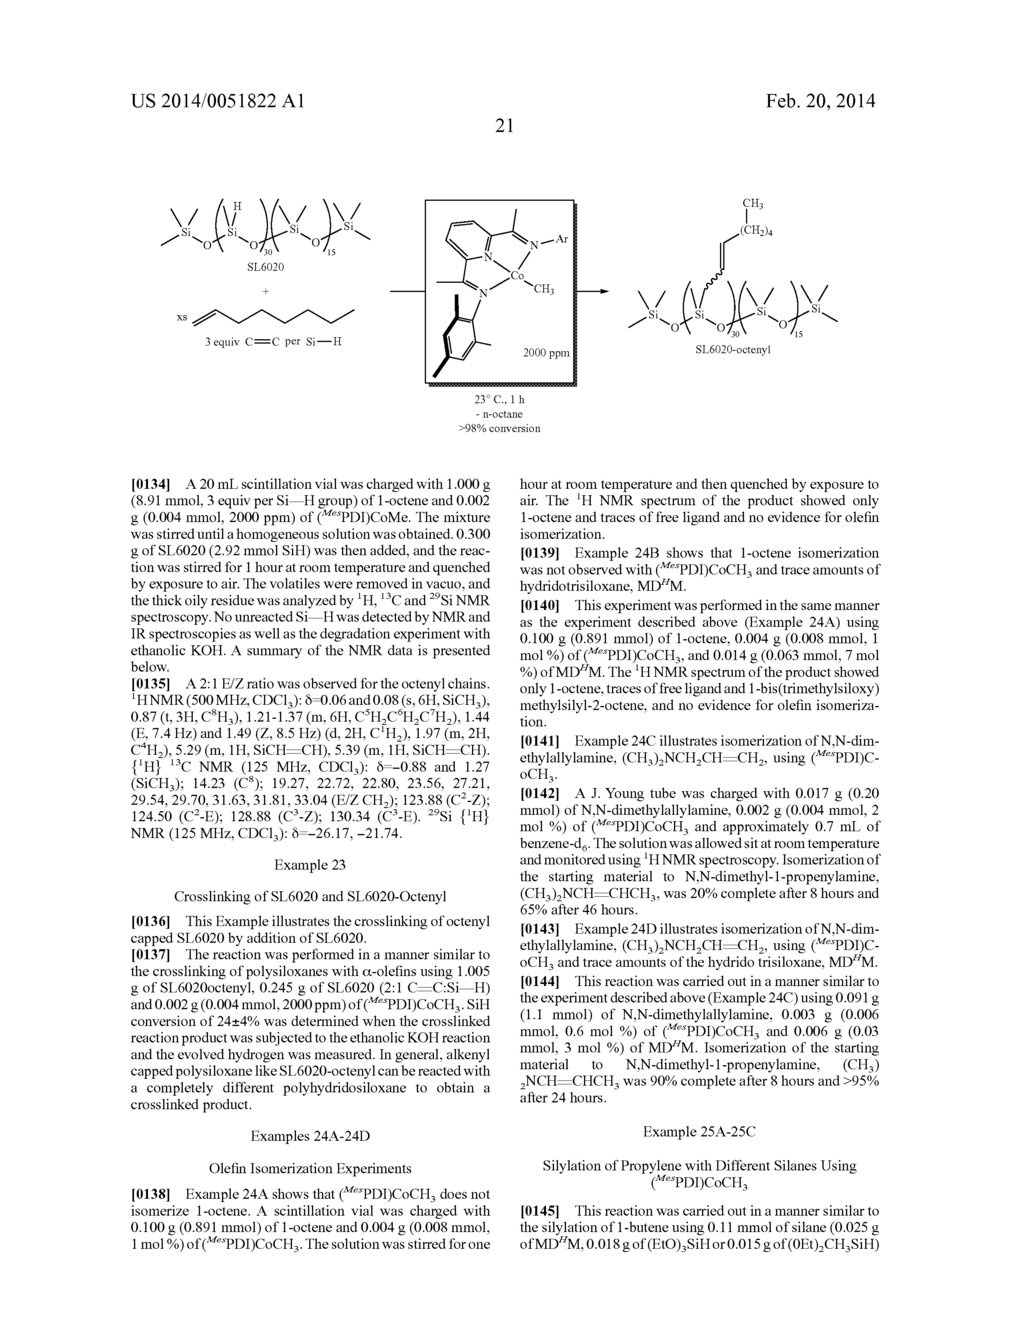 Dehydrogenative Silylation and Crosslinking Using Cobalt Catalysts - diagram, schematic, and image 22